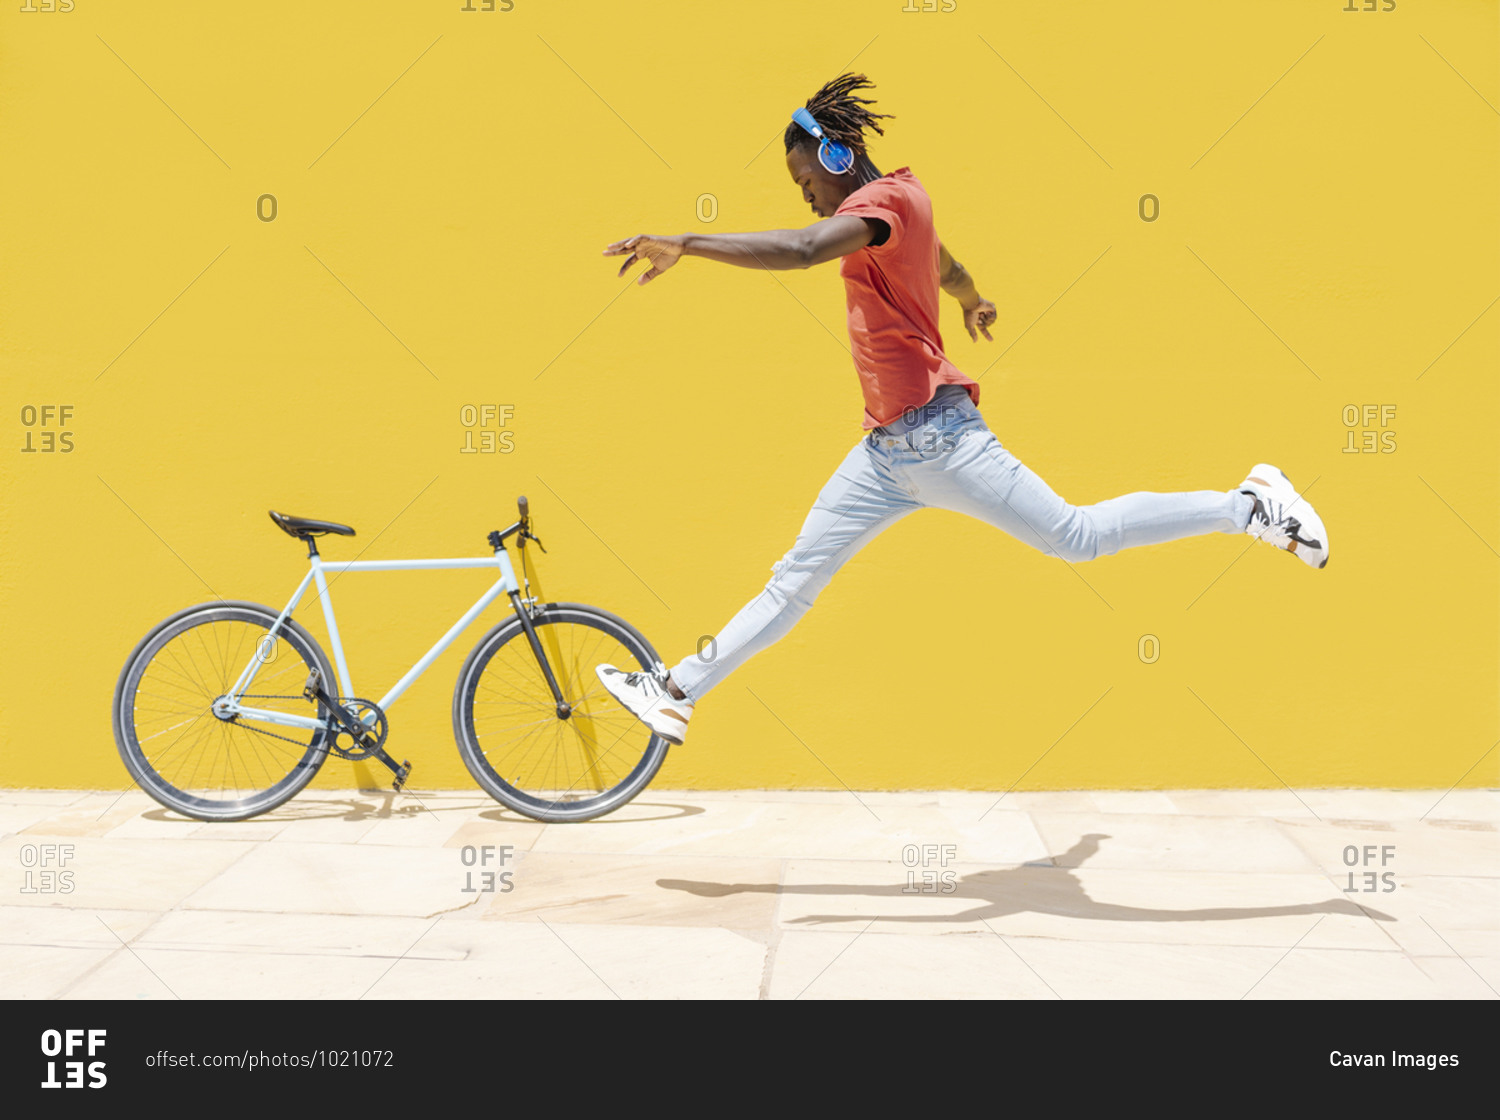 Black male leaping near bicycle